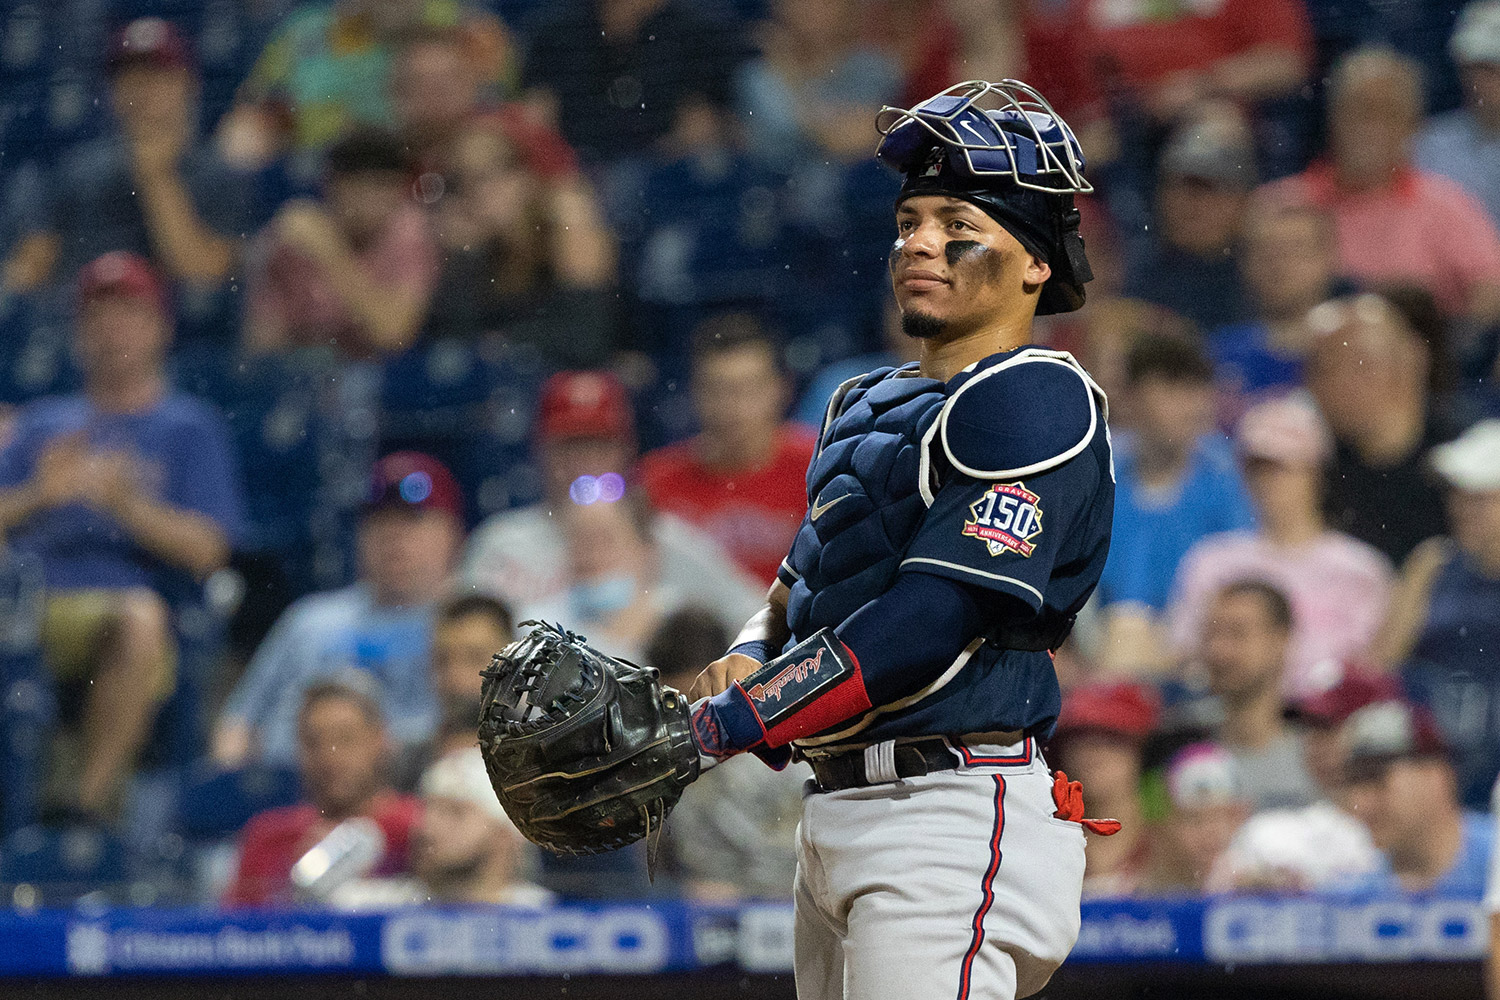 Brewers acquire All-Star catcher/DH William Contreras with piece